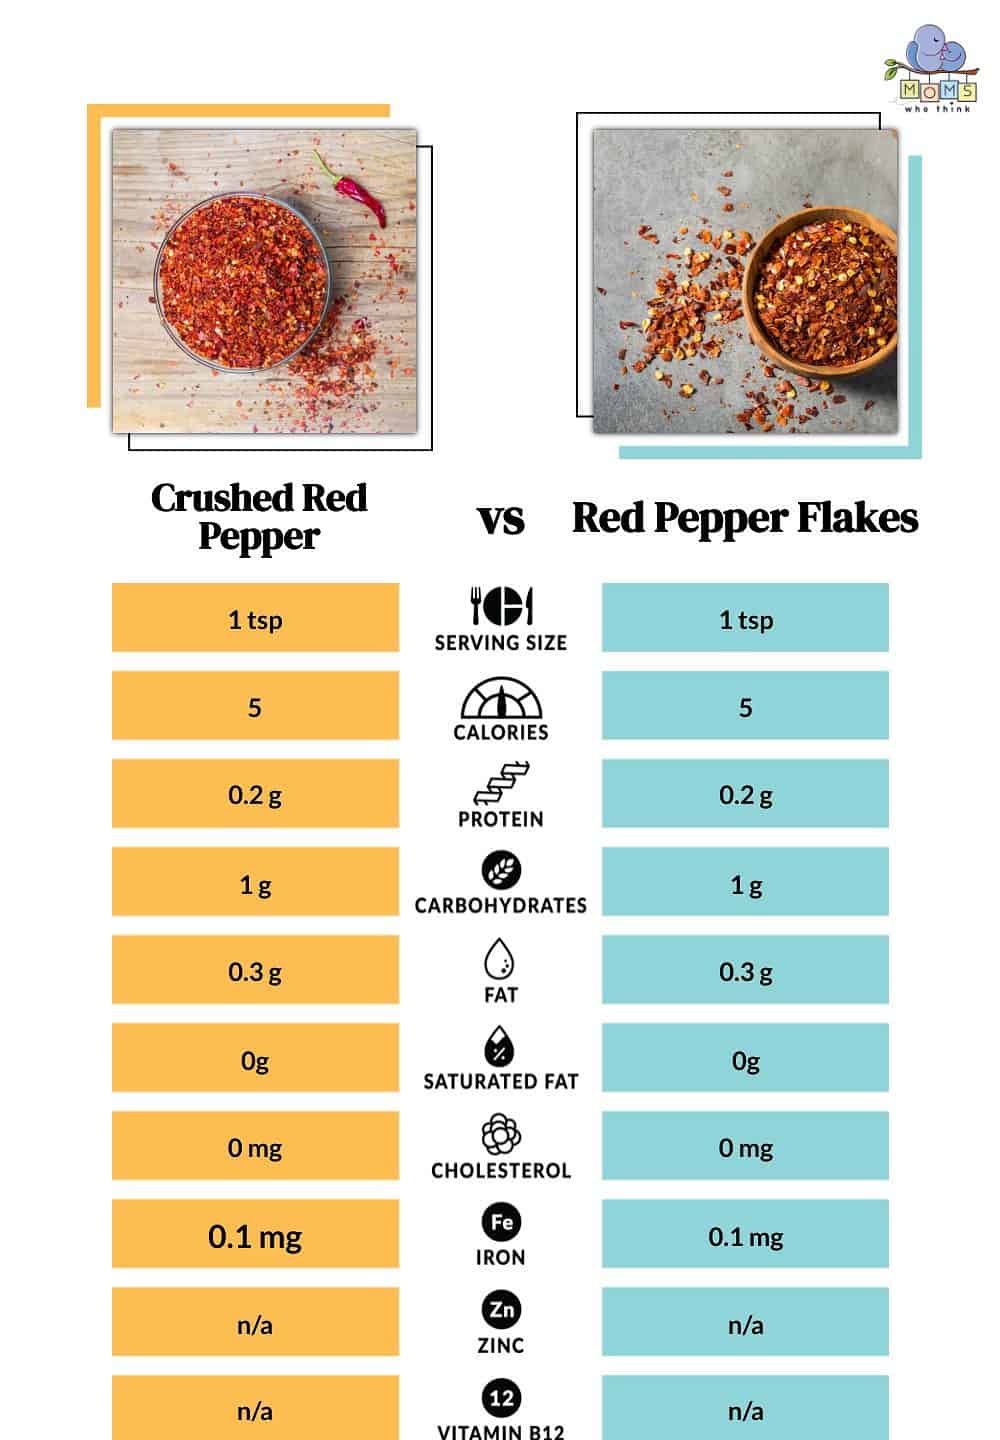 Crushed Red Pepper vs Red Pepper Flakes Nutritional Facts